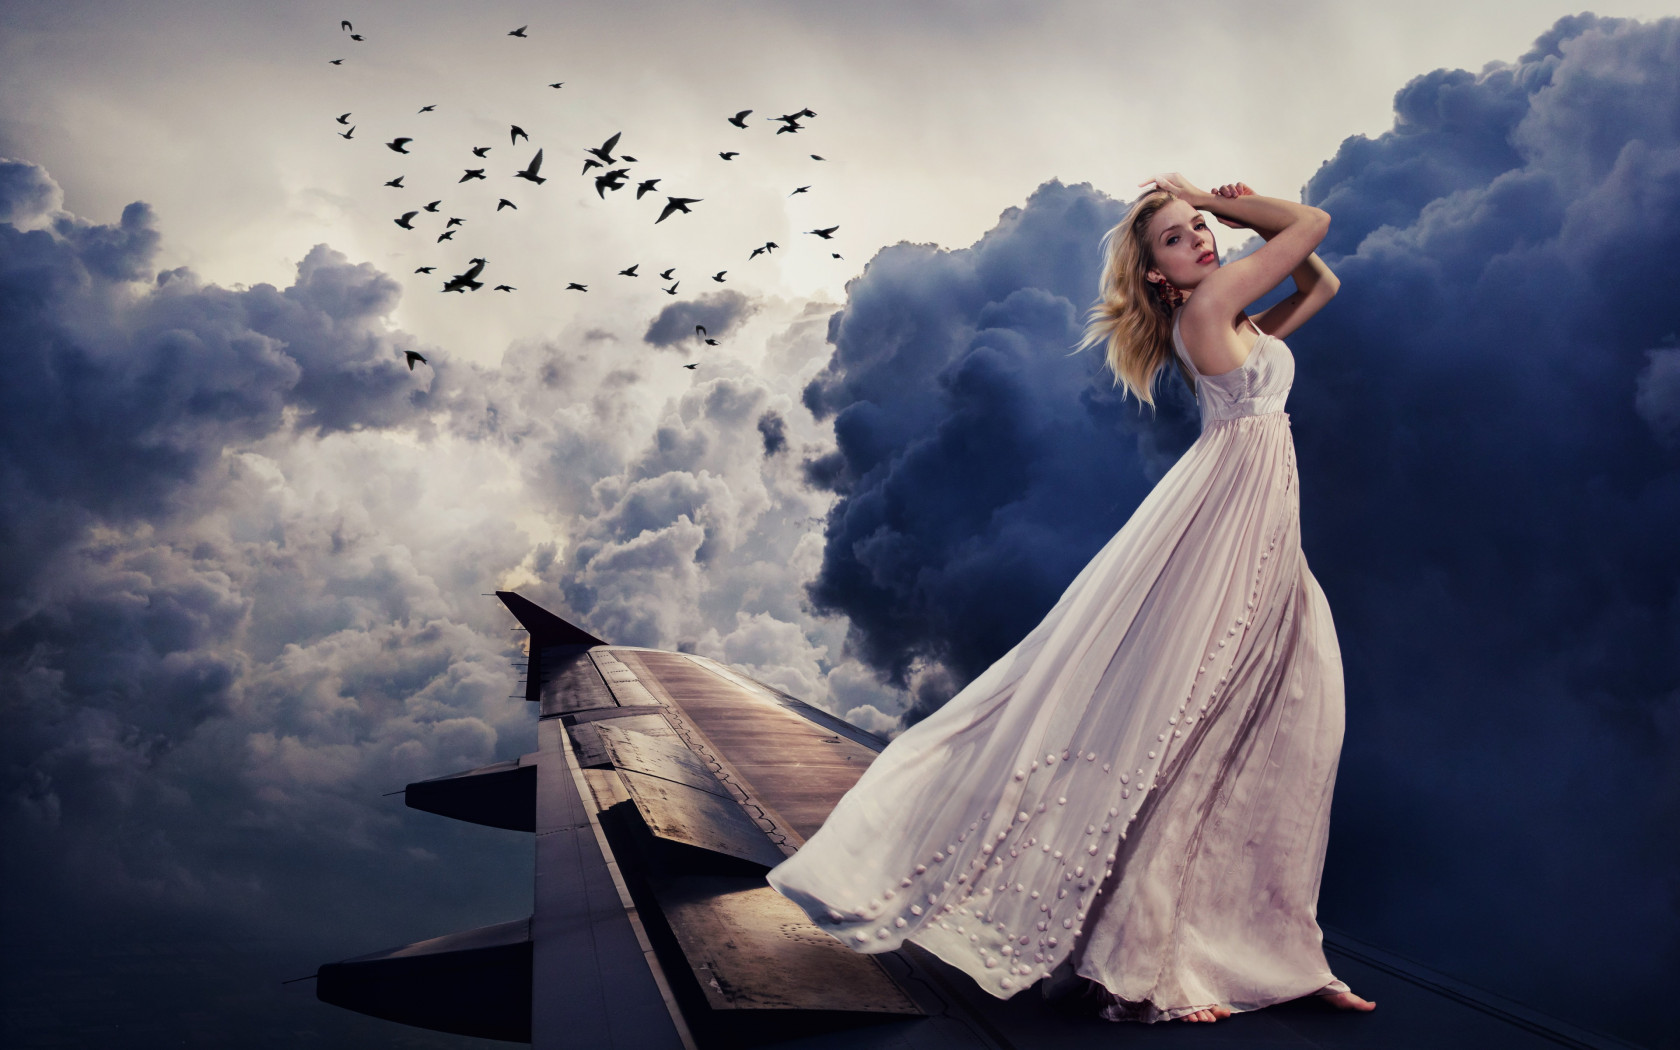 Beautiful girl on the airplane wing wallpaper 1680x1050